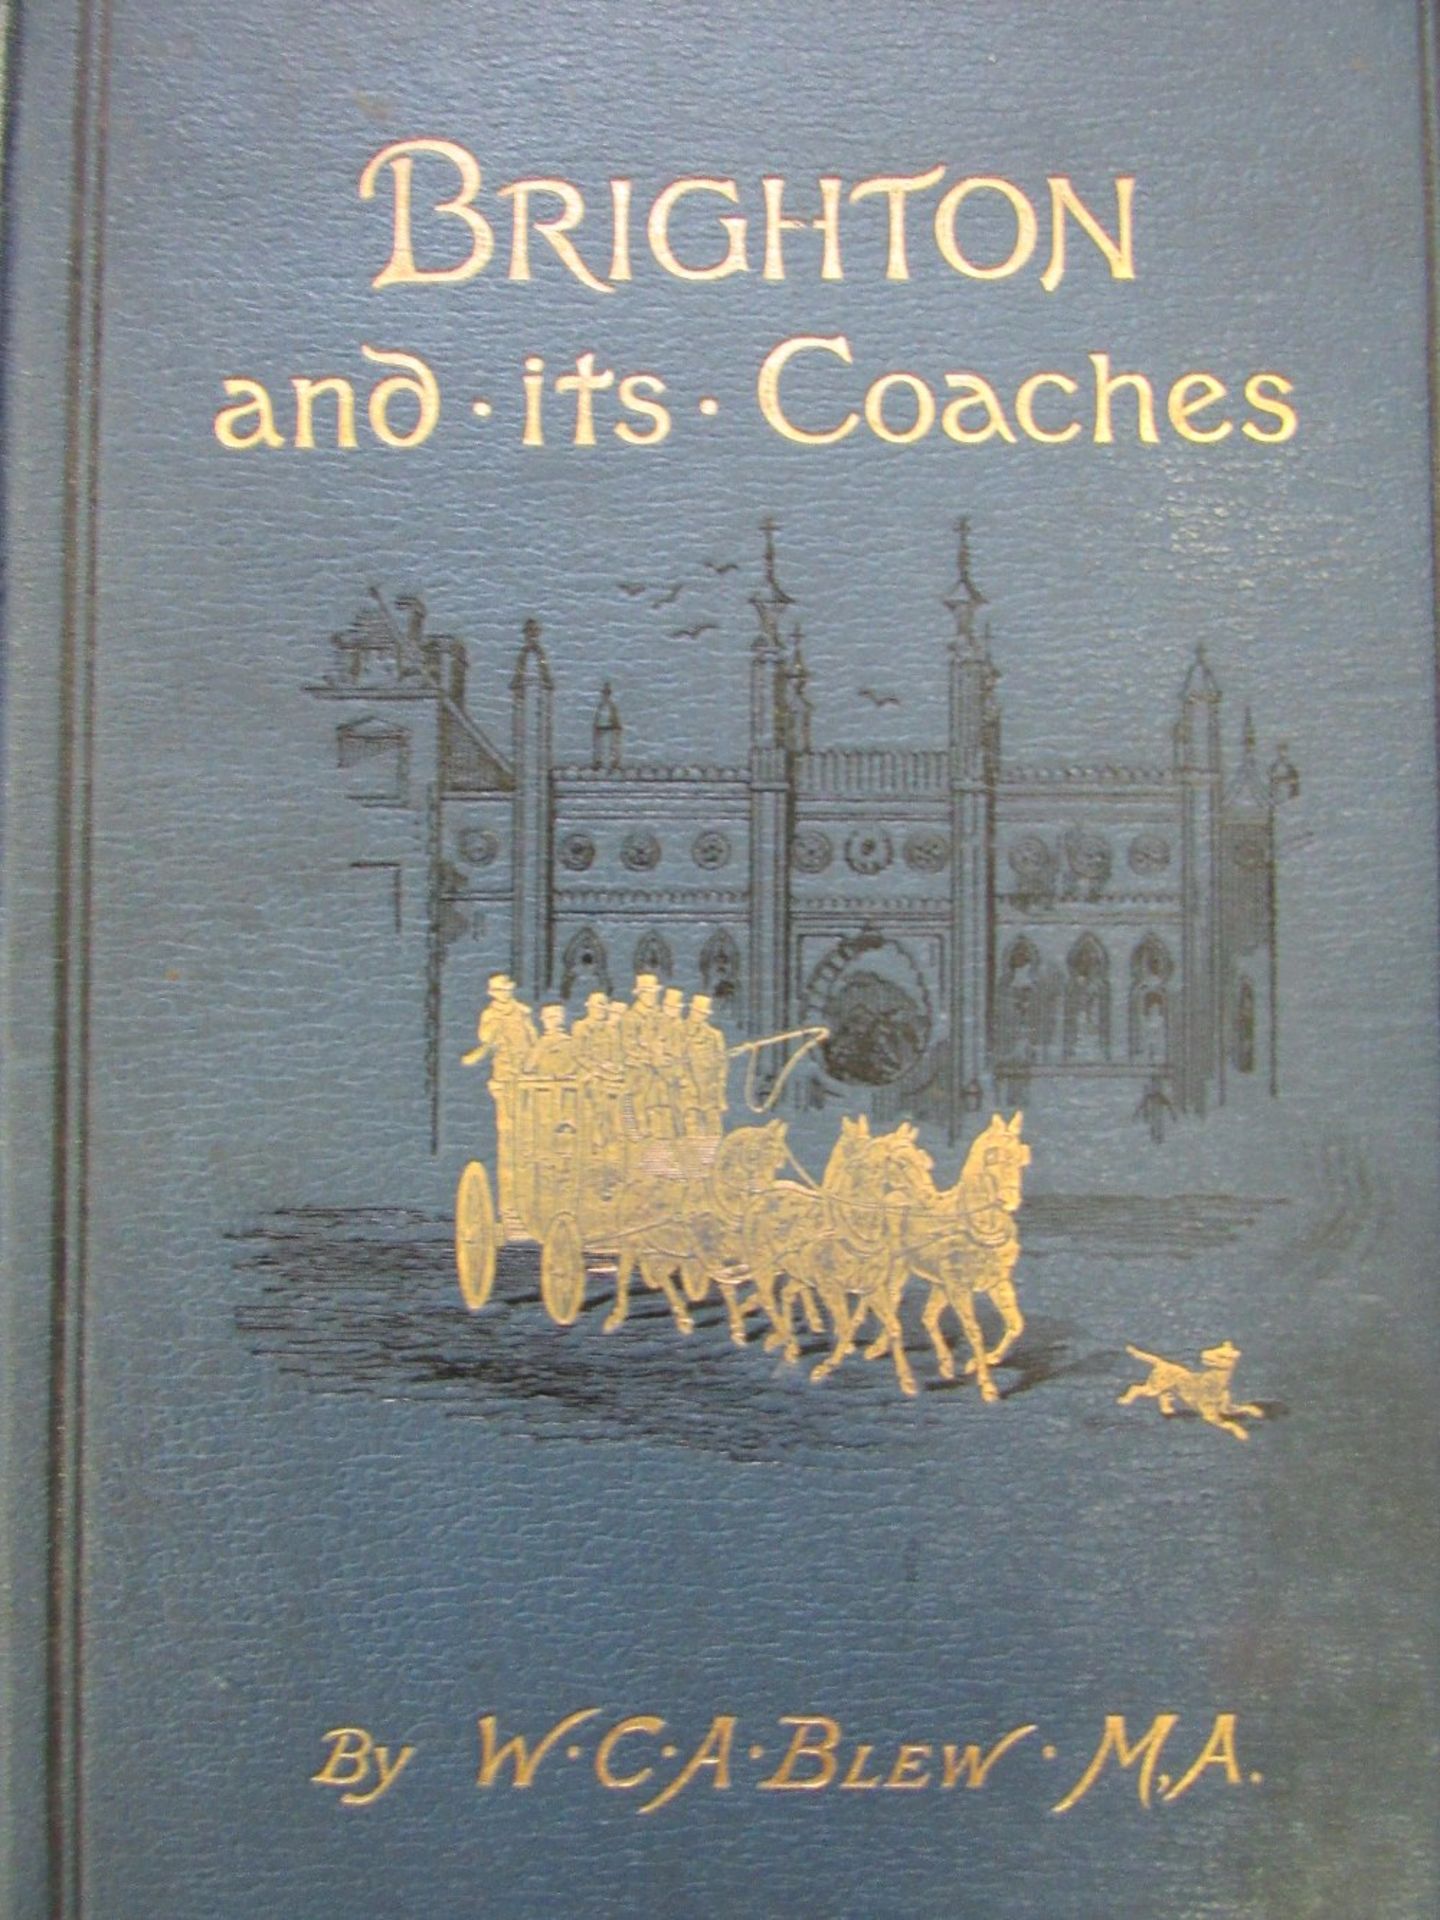 Round About a Brighton Coach Office by Maude King, printed by Vineyard Press and Brighton and It's - Image 2 of 5